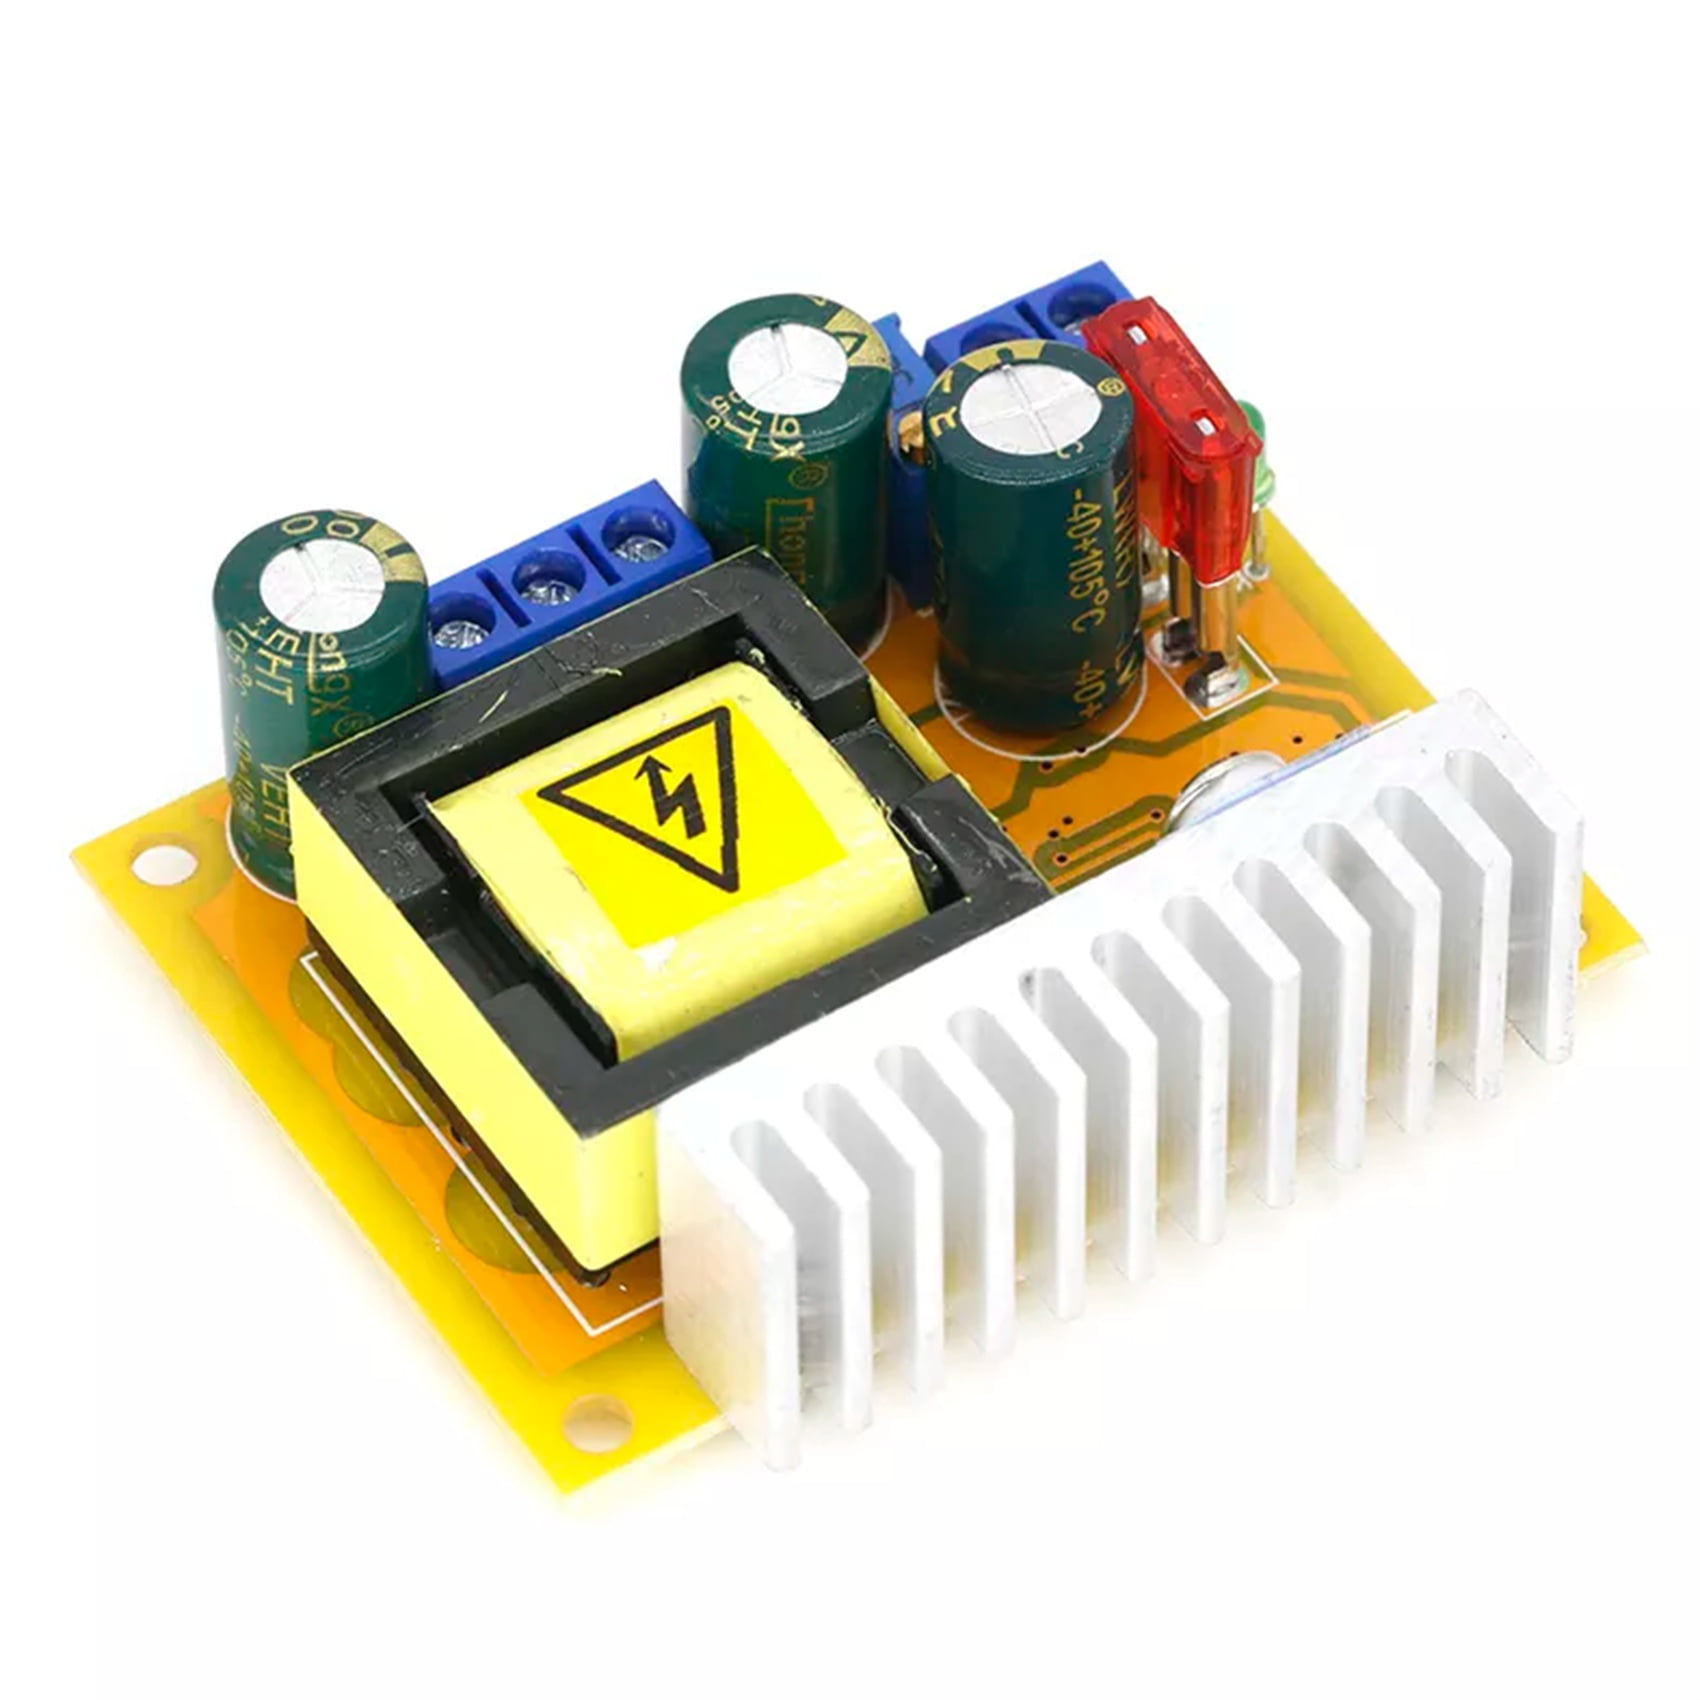 SNOWINSPRING 8-32V to 45-390V DC-DC Boost Converter Step Up Supply Module  High Voltage ZVS Capacitor Charging Board(Dual) 